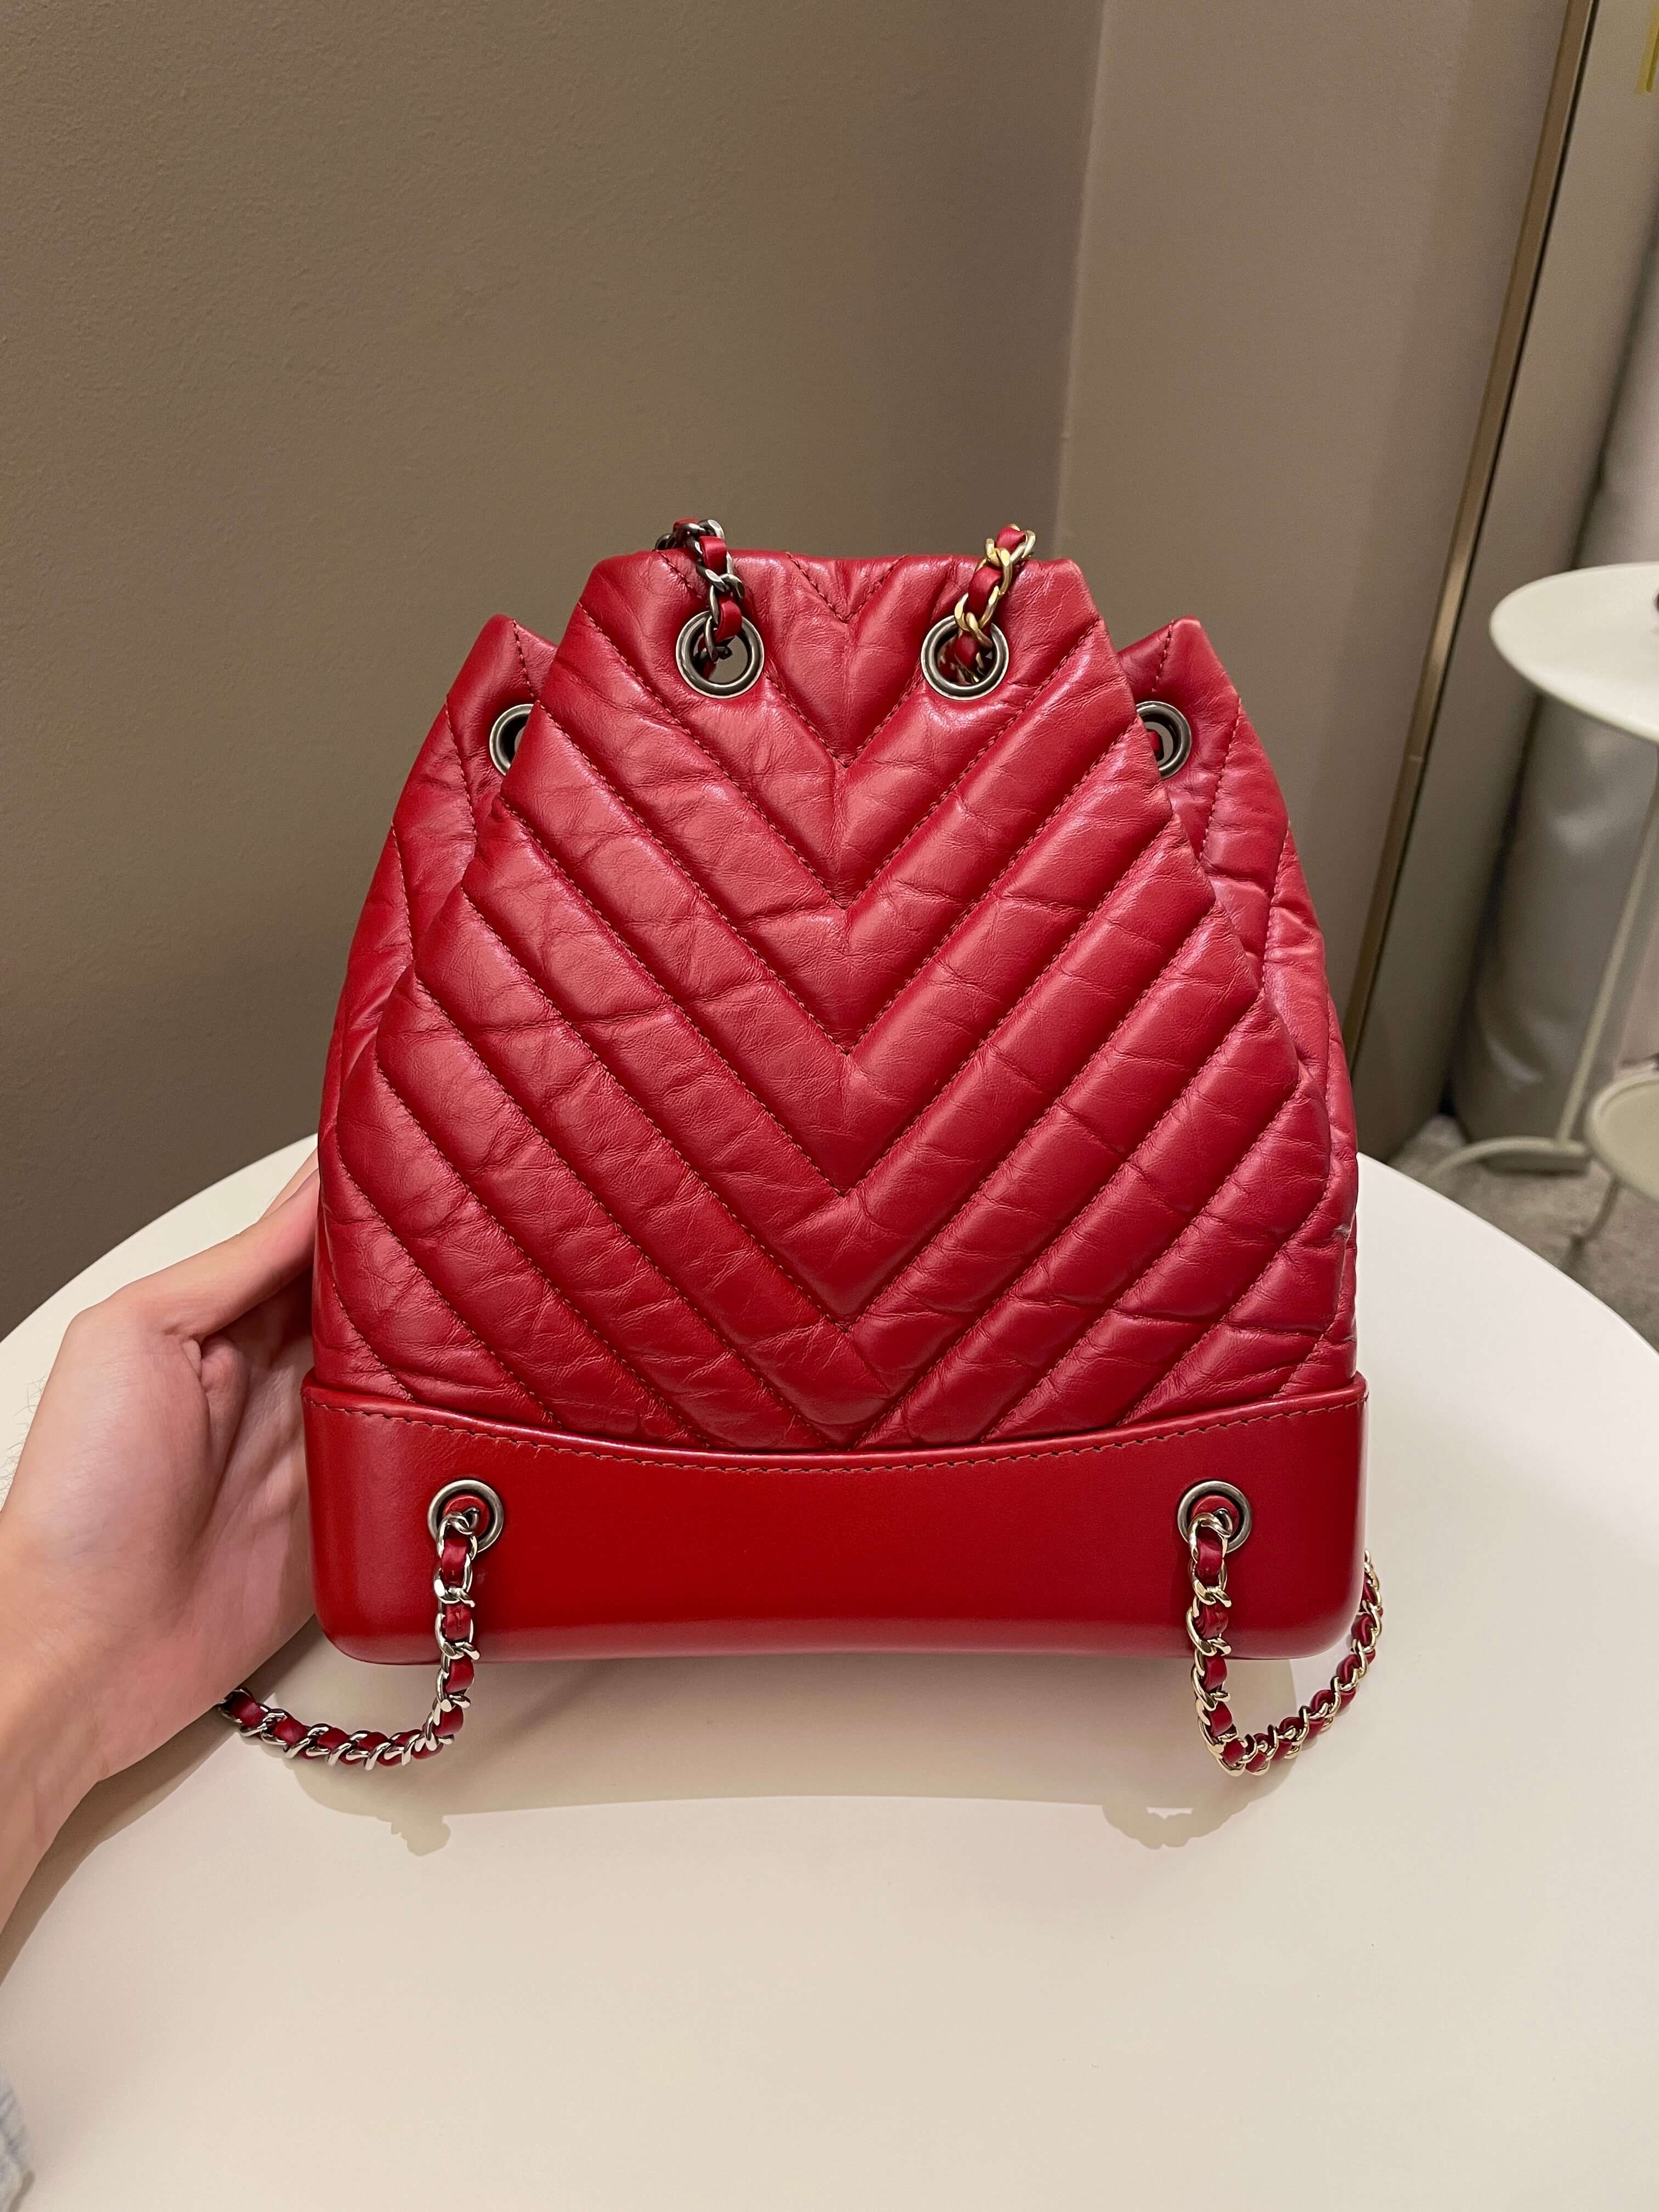 This item is SOLD* Brand: Chanel⁠ Item: Red Chevron Gabrielle